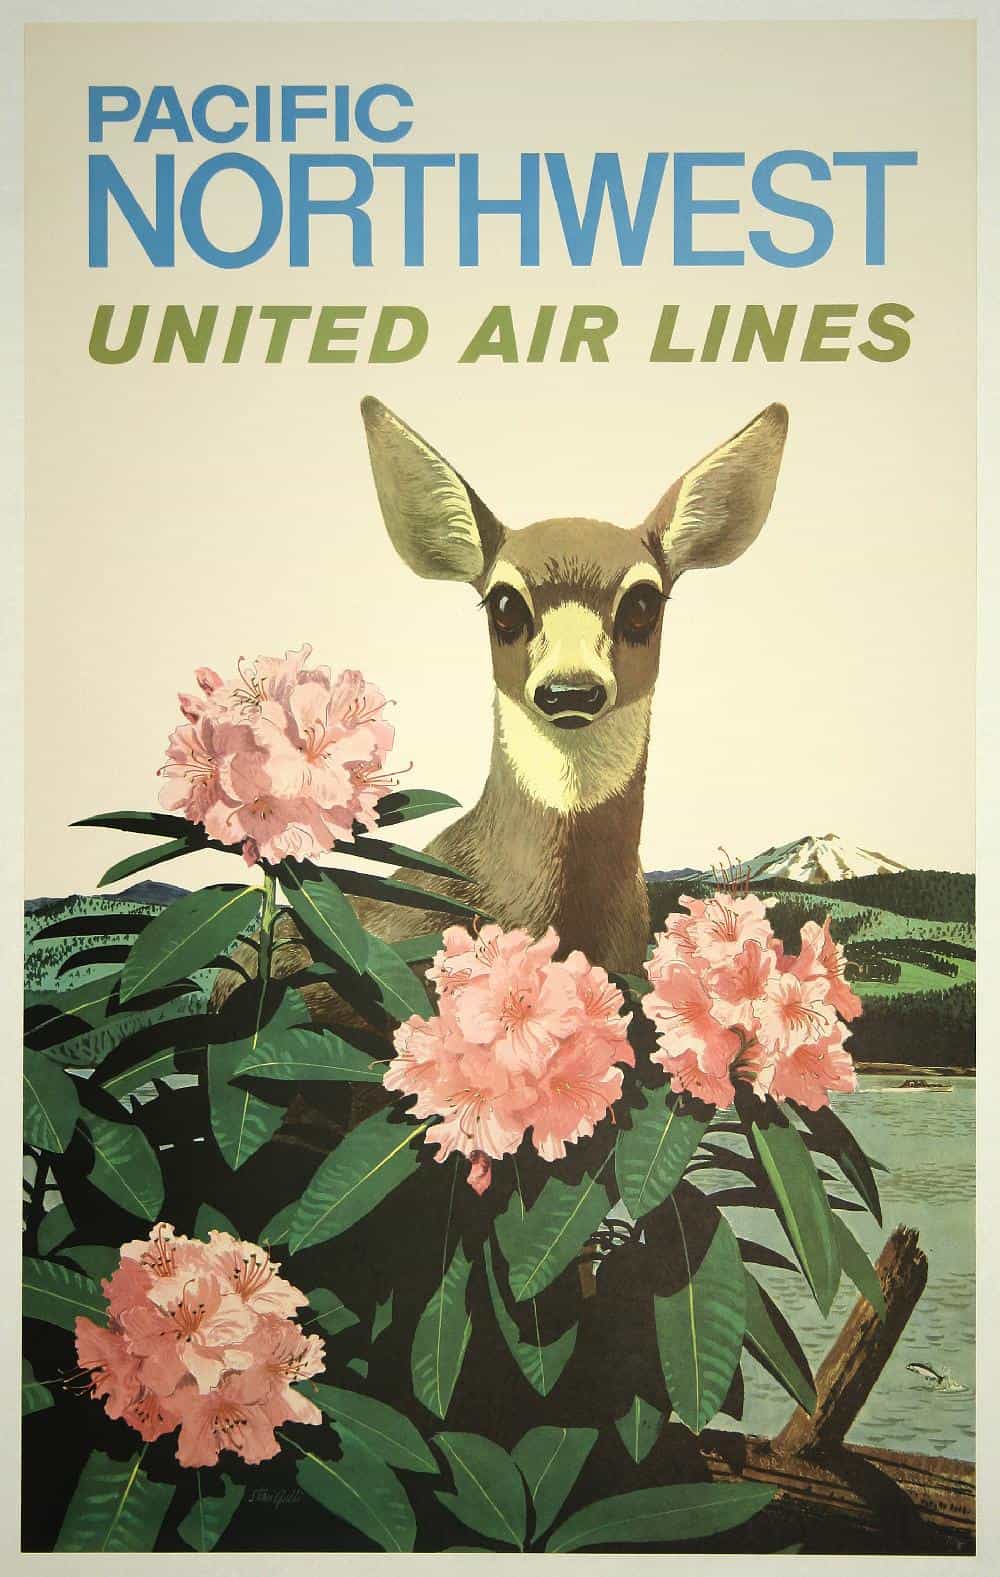 United Air Lines Pacific Northwest Stan Galli 1960s Vintage Travel Poster